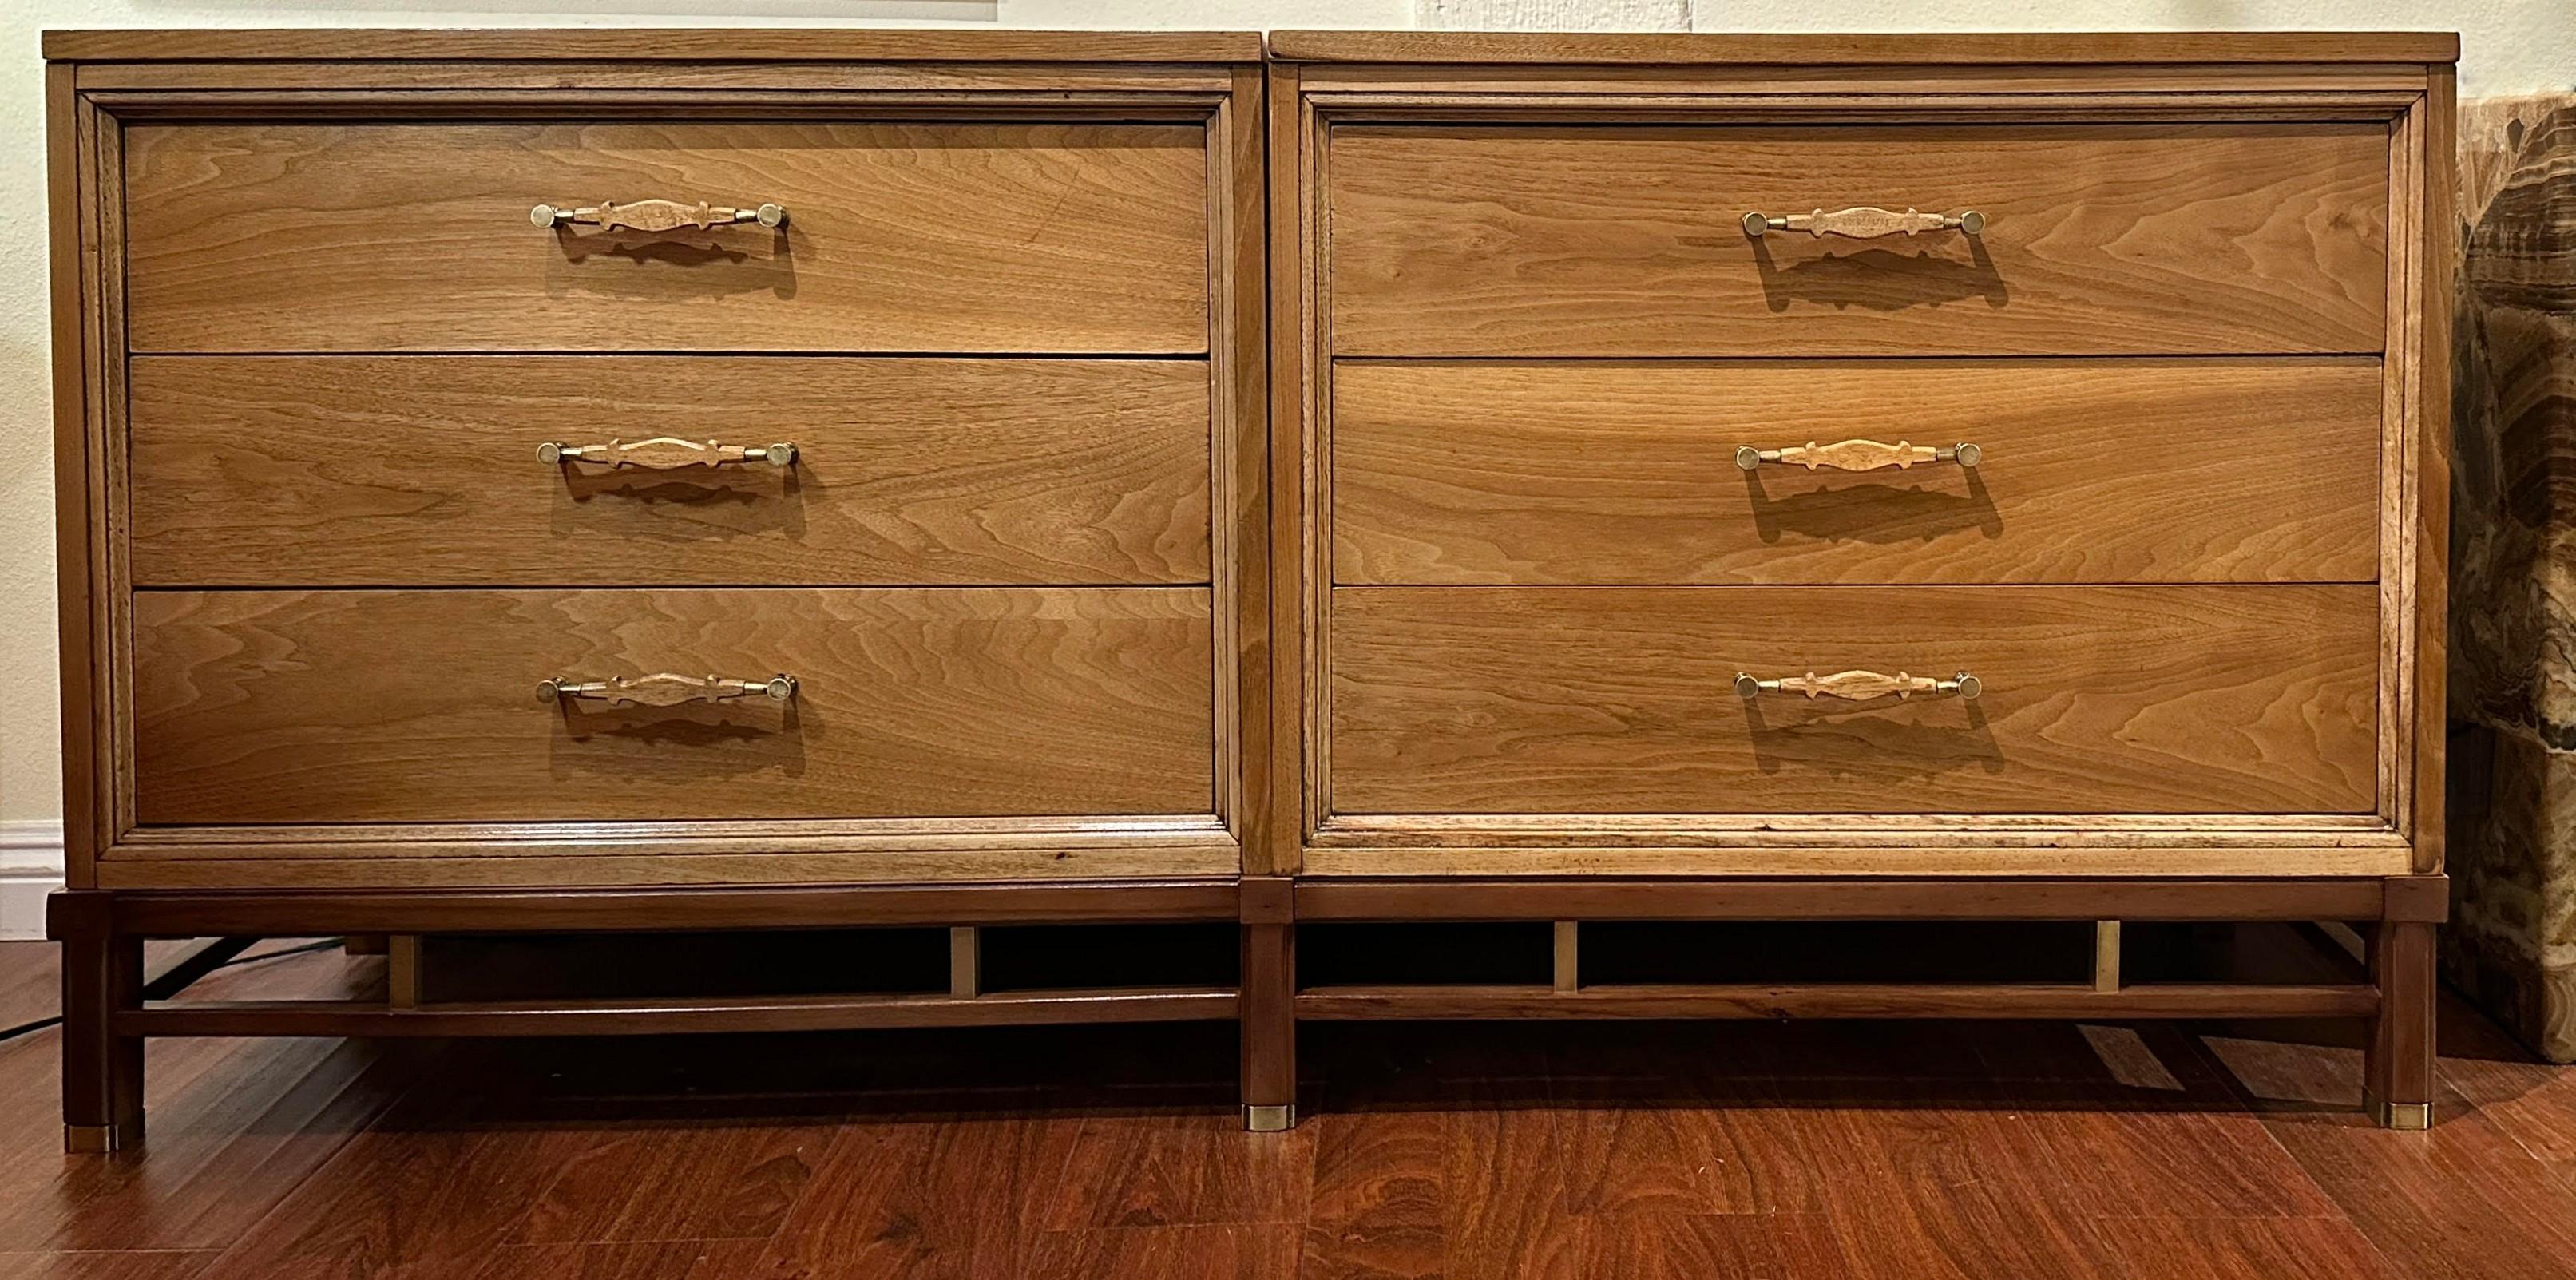 An elegant blonde walnut dresser by American of Martinsville catches the eye with its twin blocks of drawers resting on a slightly darker base. The designer ingeniously crafted these large dressers for easier maneuverability into smaller rooms. The